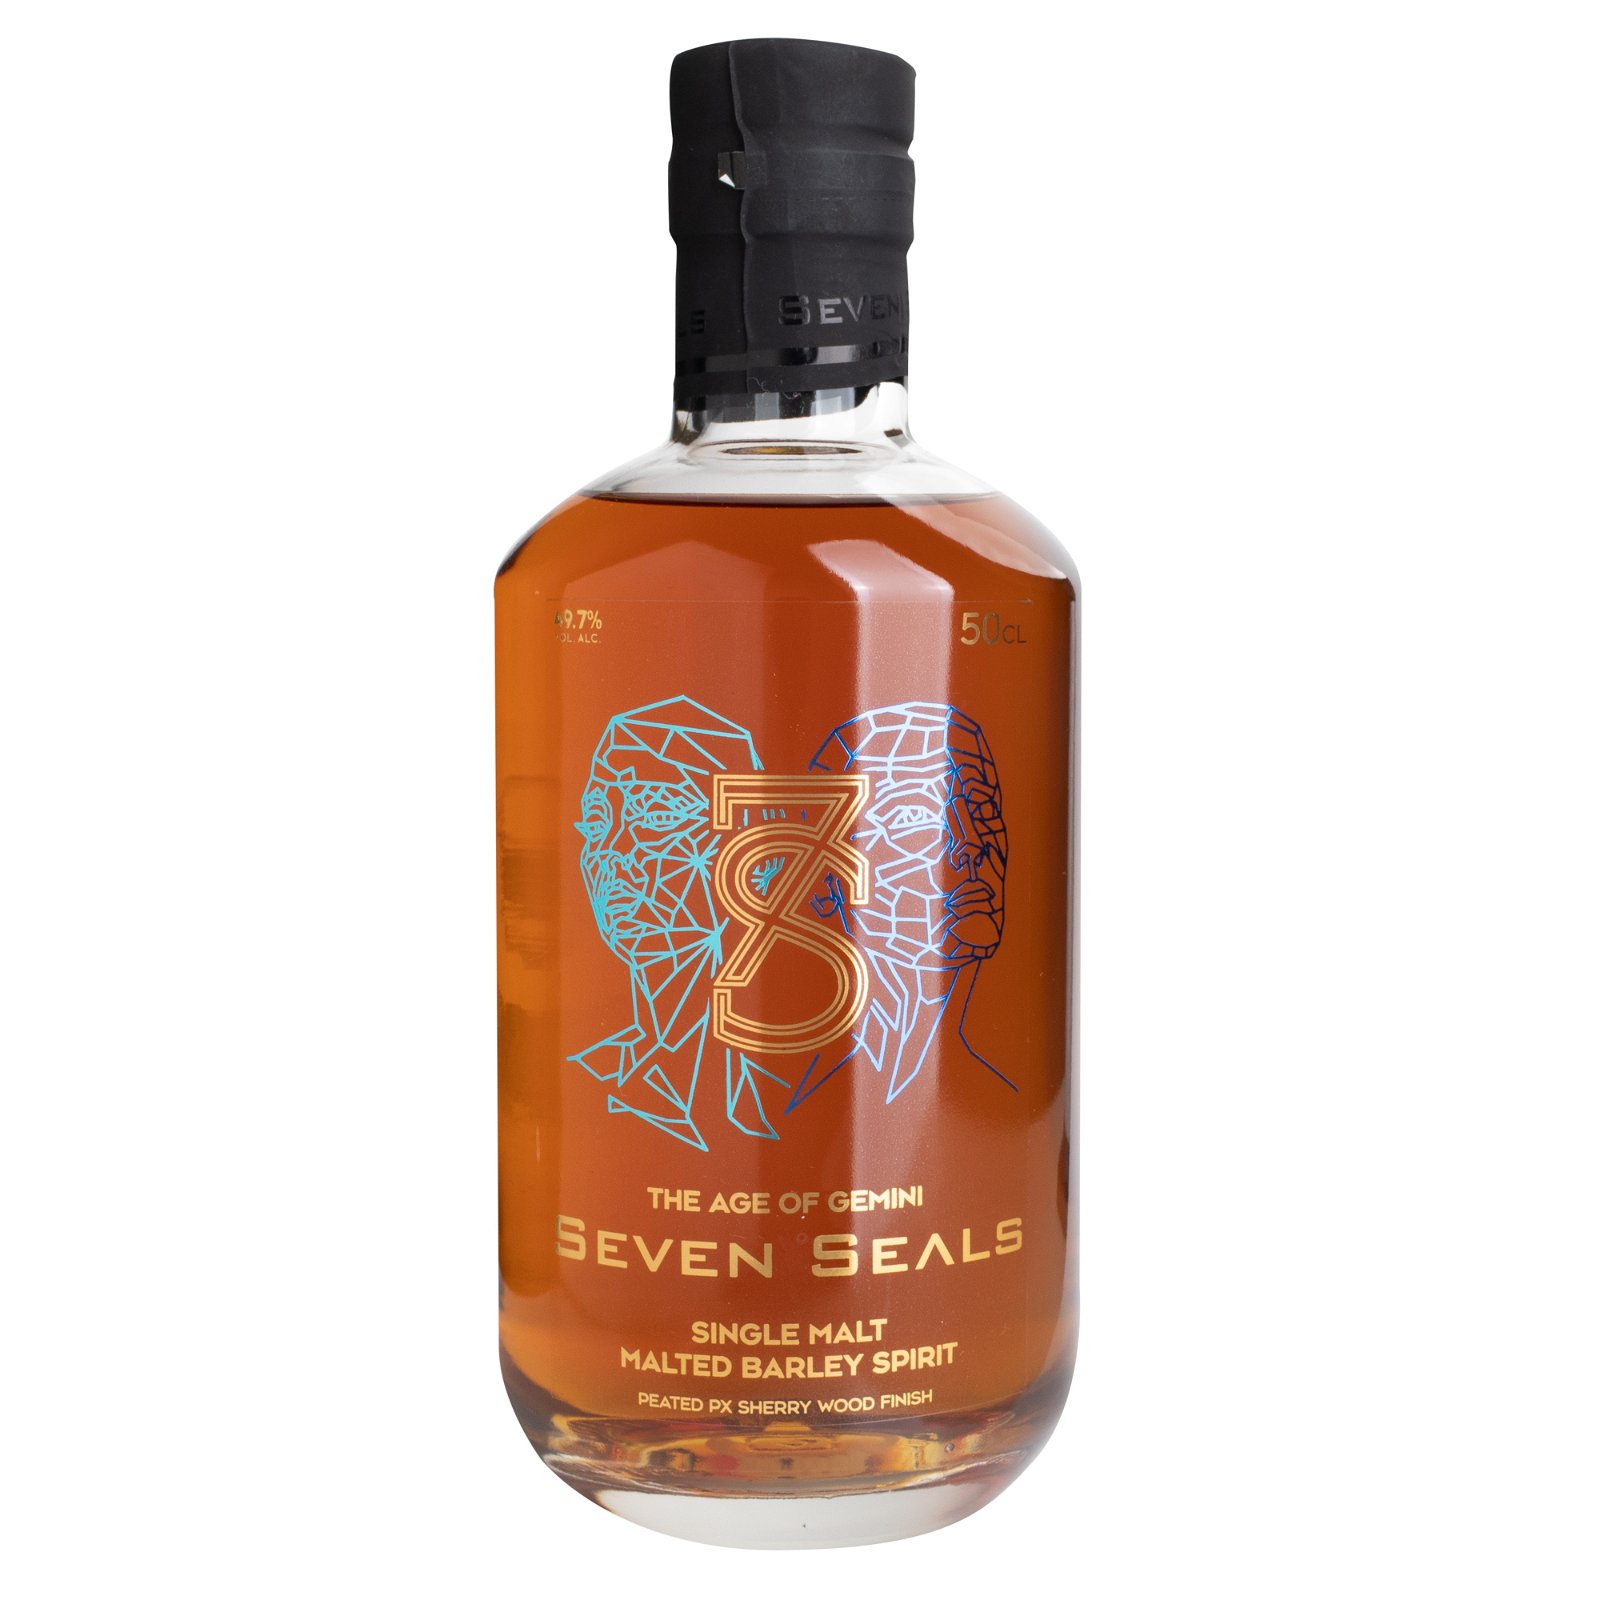 Seven Seals The Age of Gemini Peated PX Sherry Wood Finish